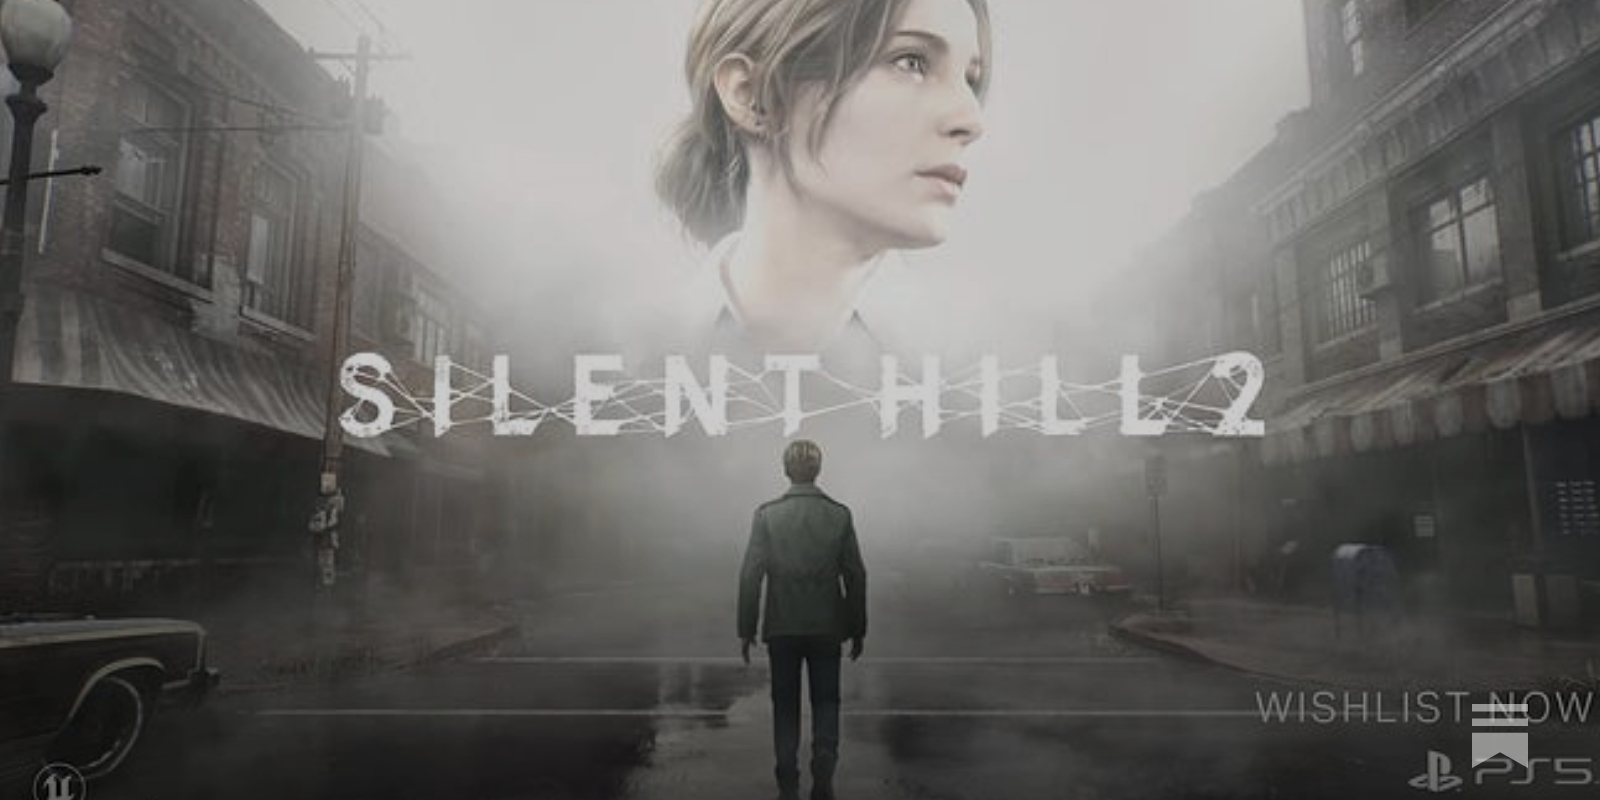 What have they done? - SILENT HILL: Ascension - Batman - The